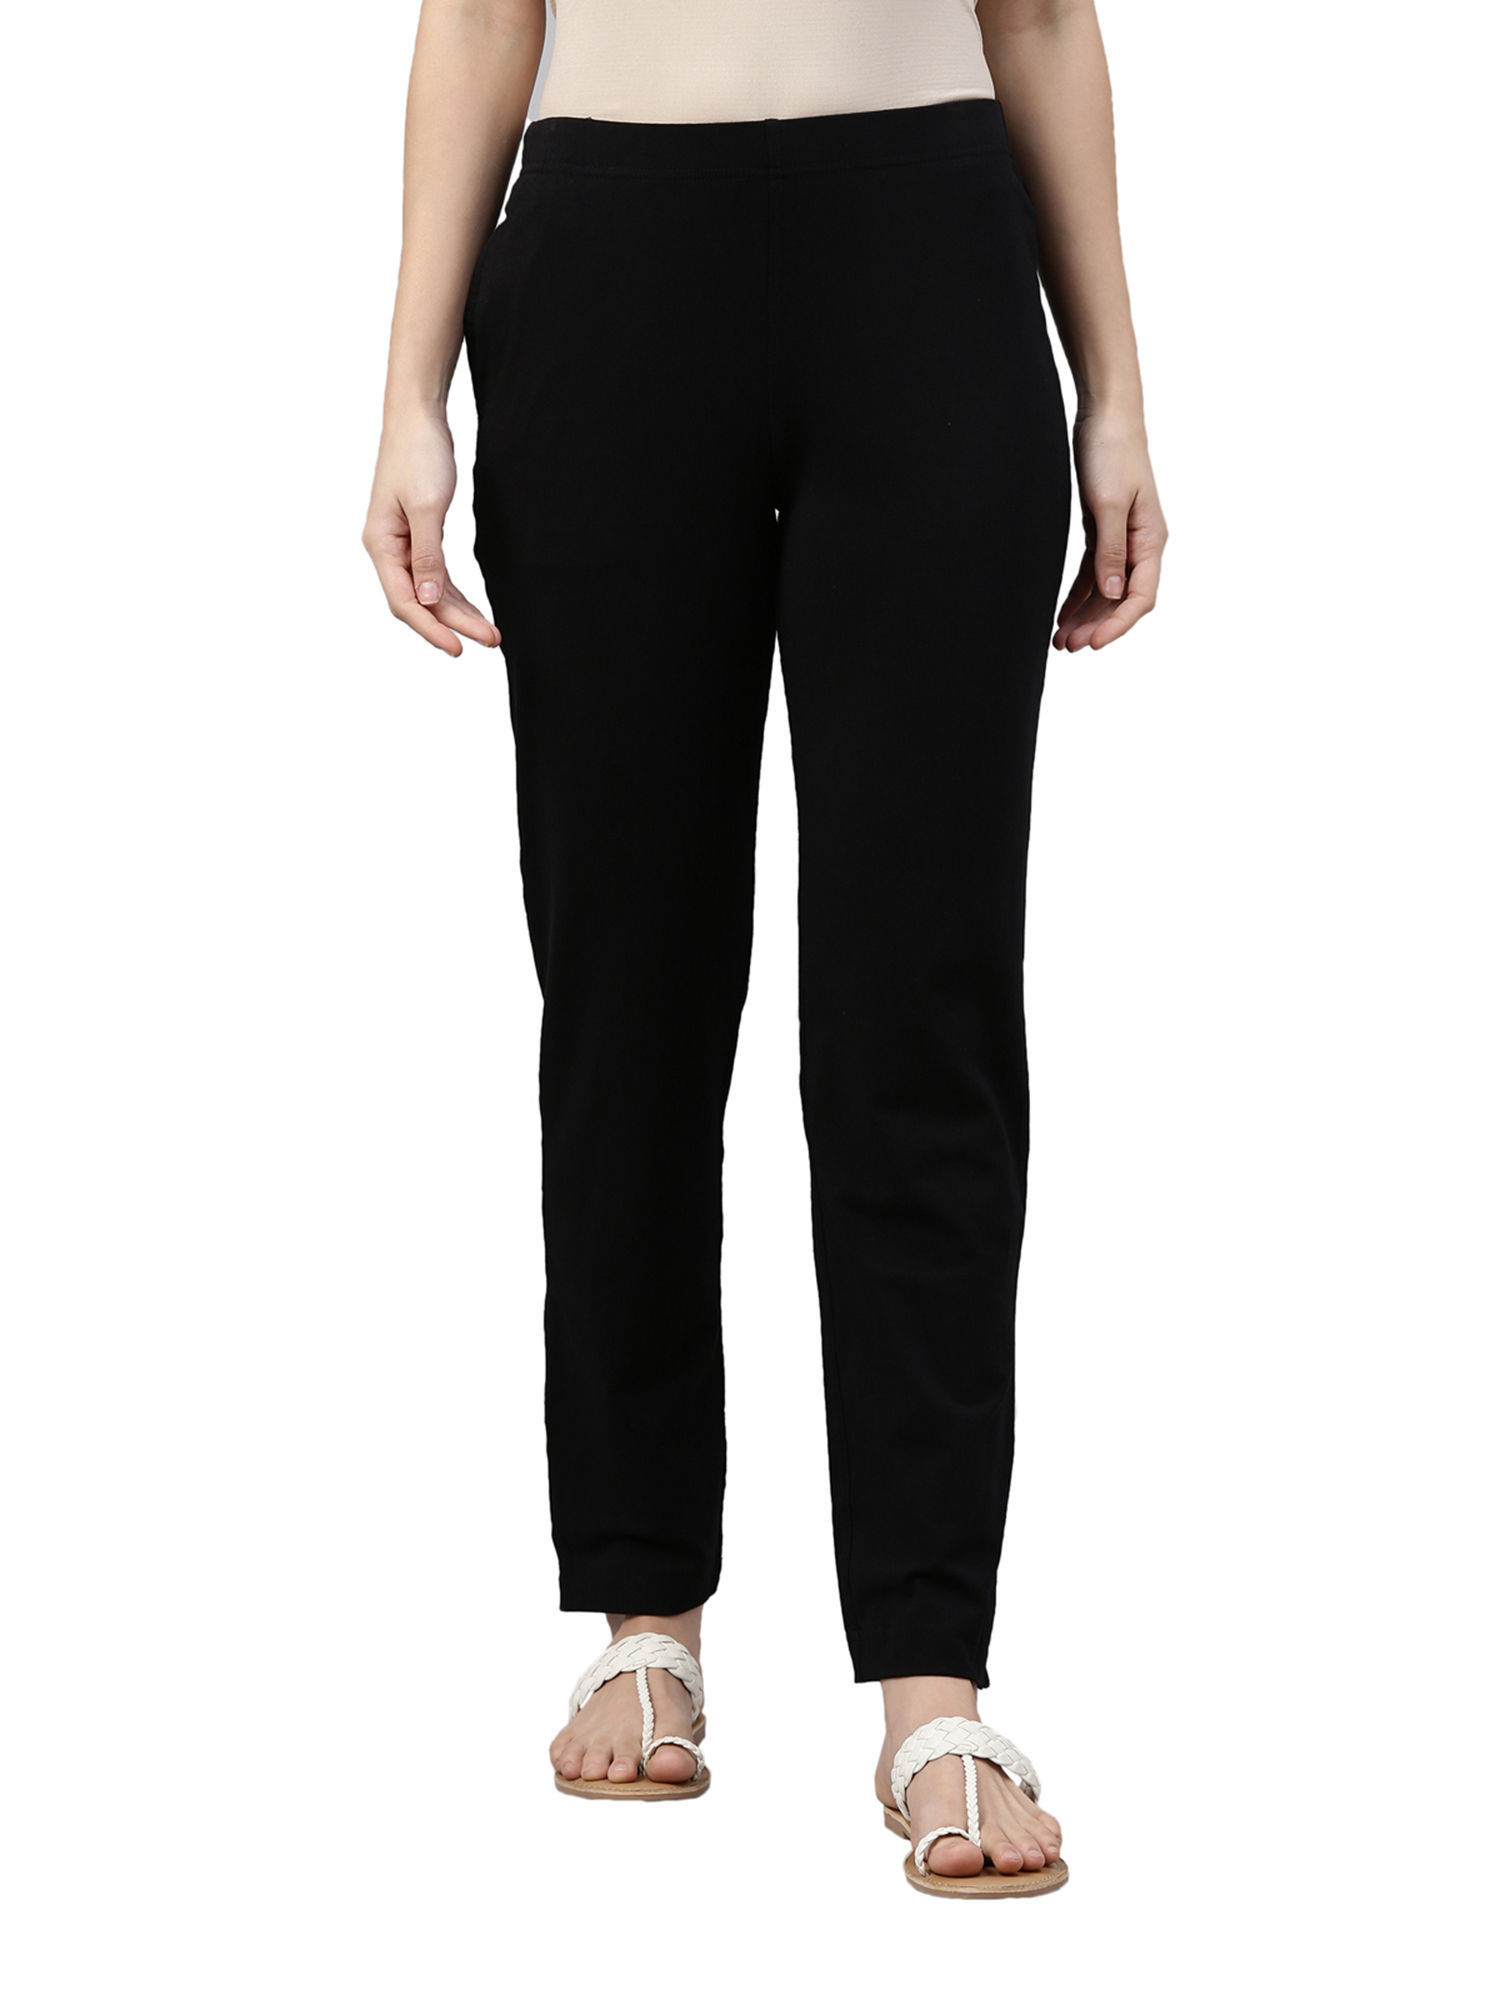 Relaxed Fit Cotton drawstring trousers - Black - Men | H&M IN